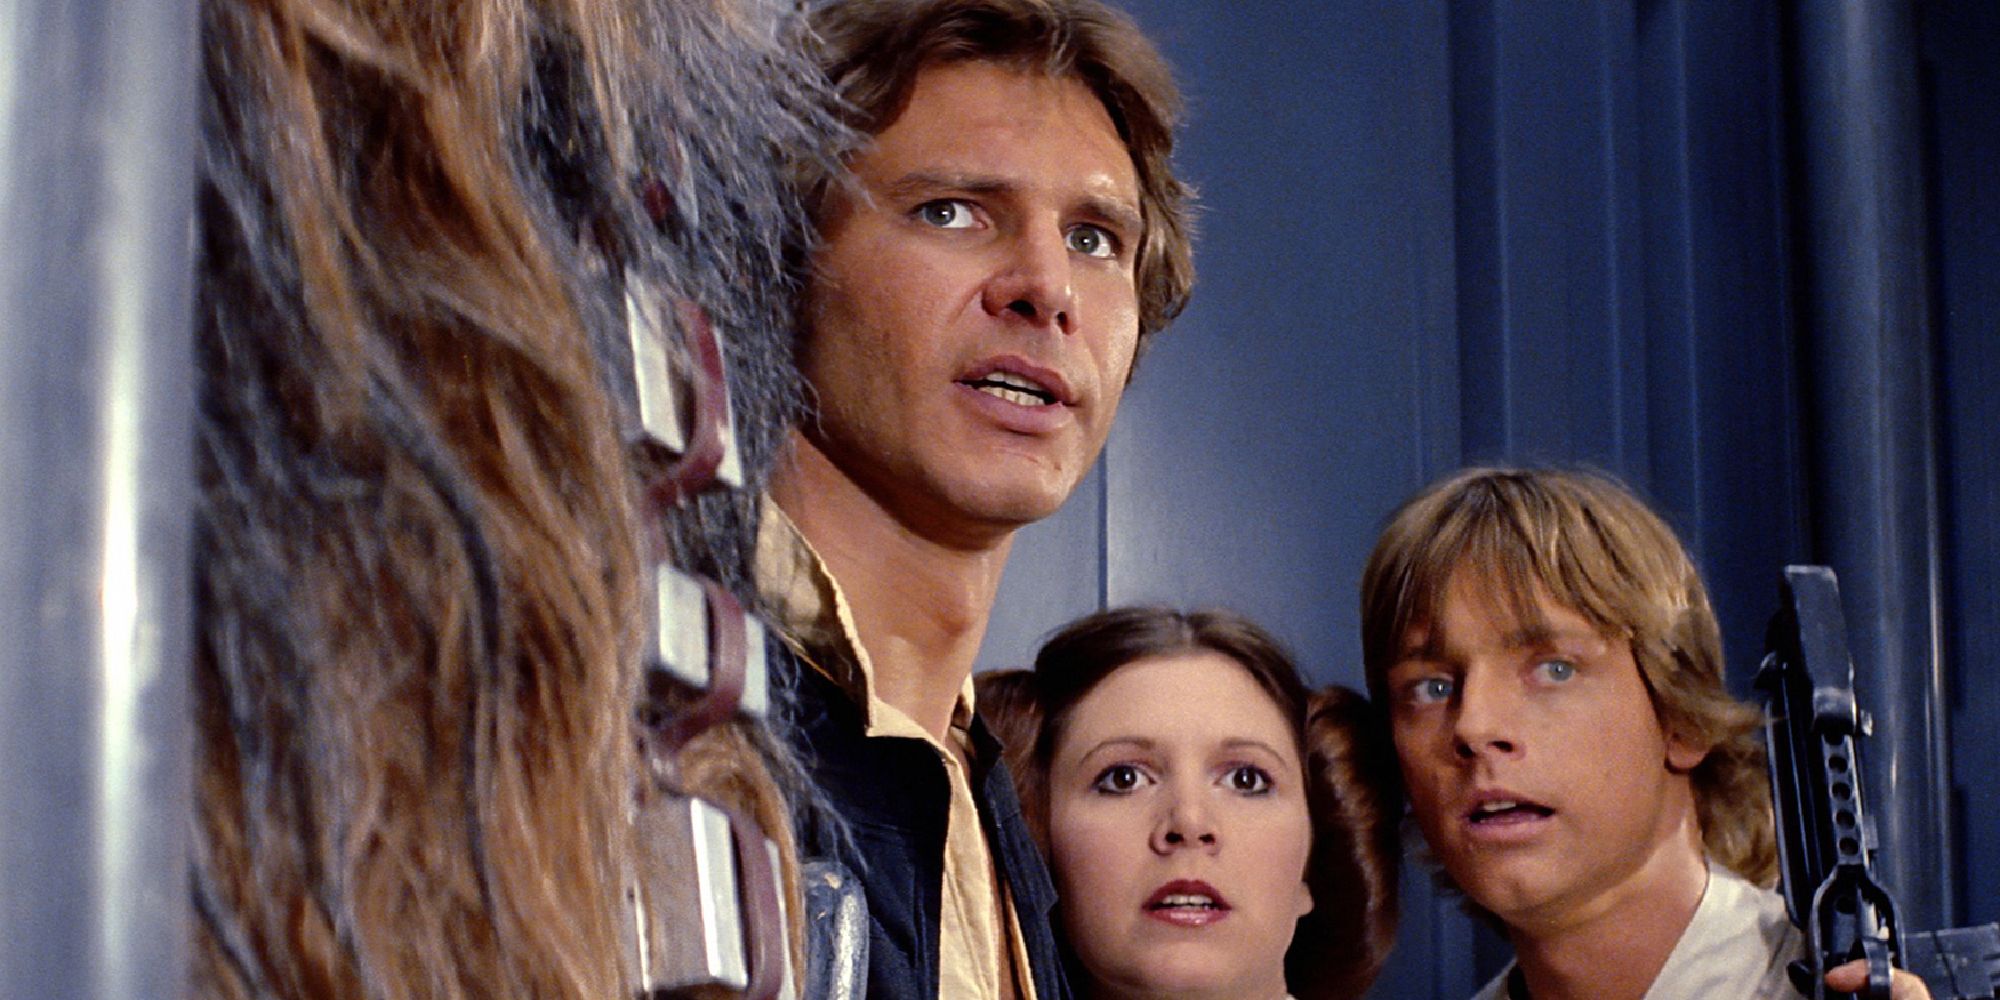 Han Solo, Leia and Luke Skywalker in Star Wars: Episode IV - A New Hope